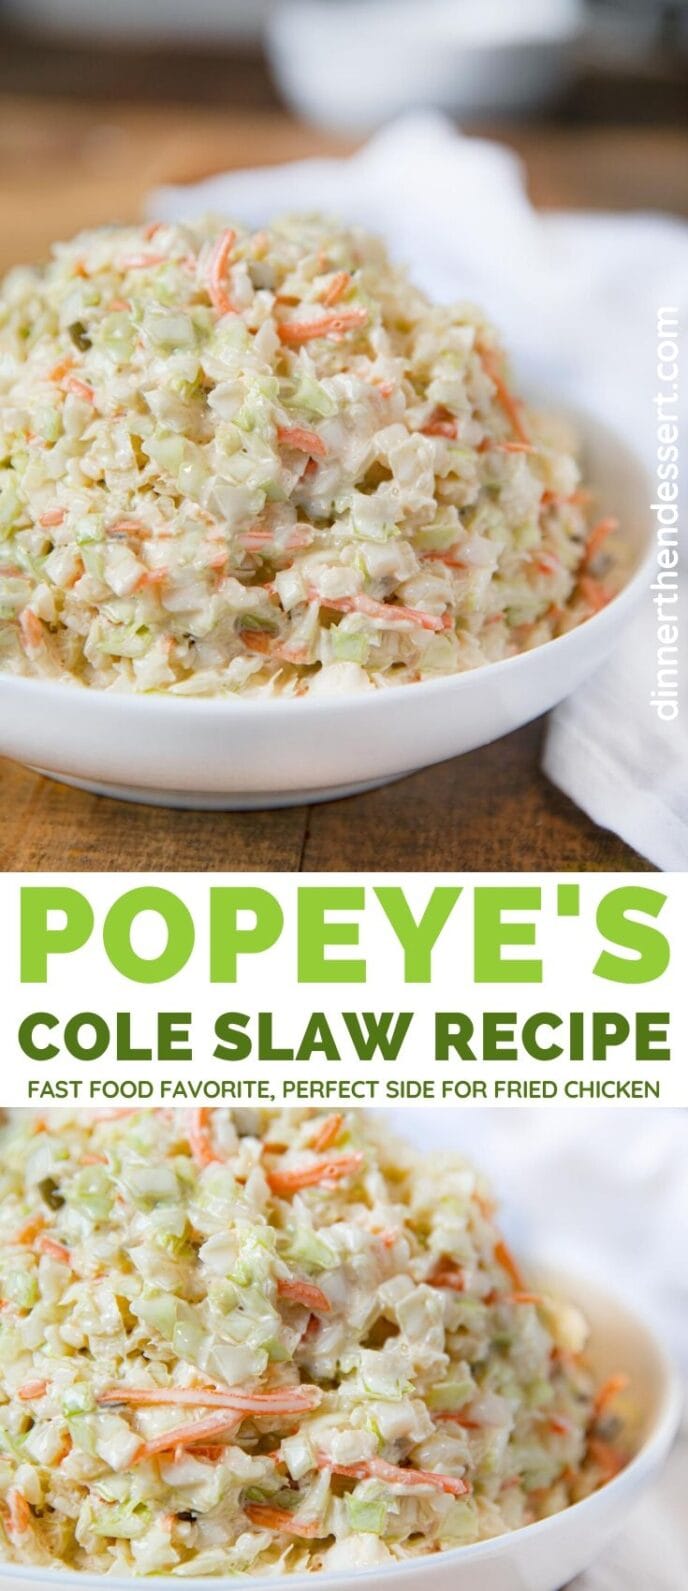 Popeye's Cole Slaw collage